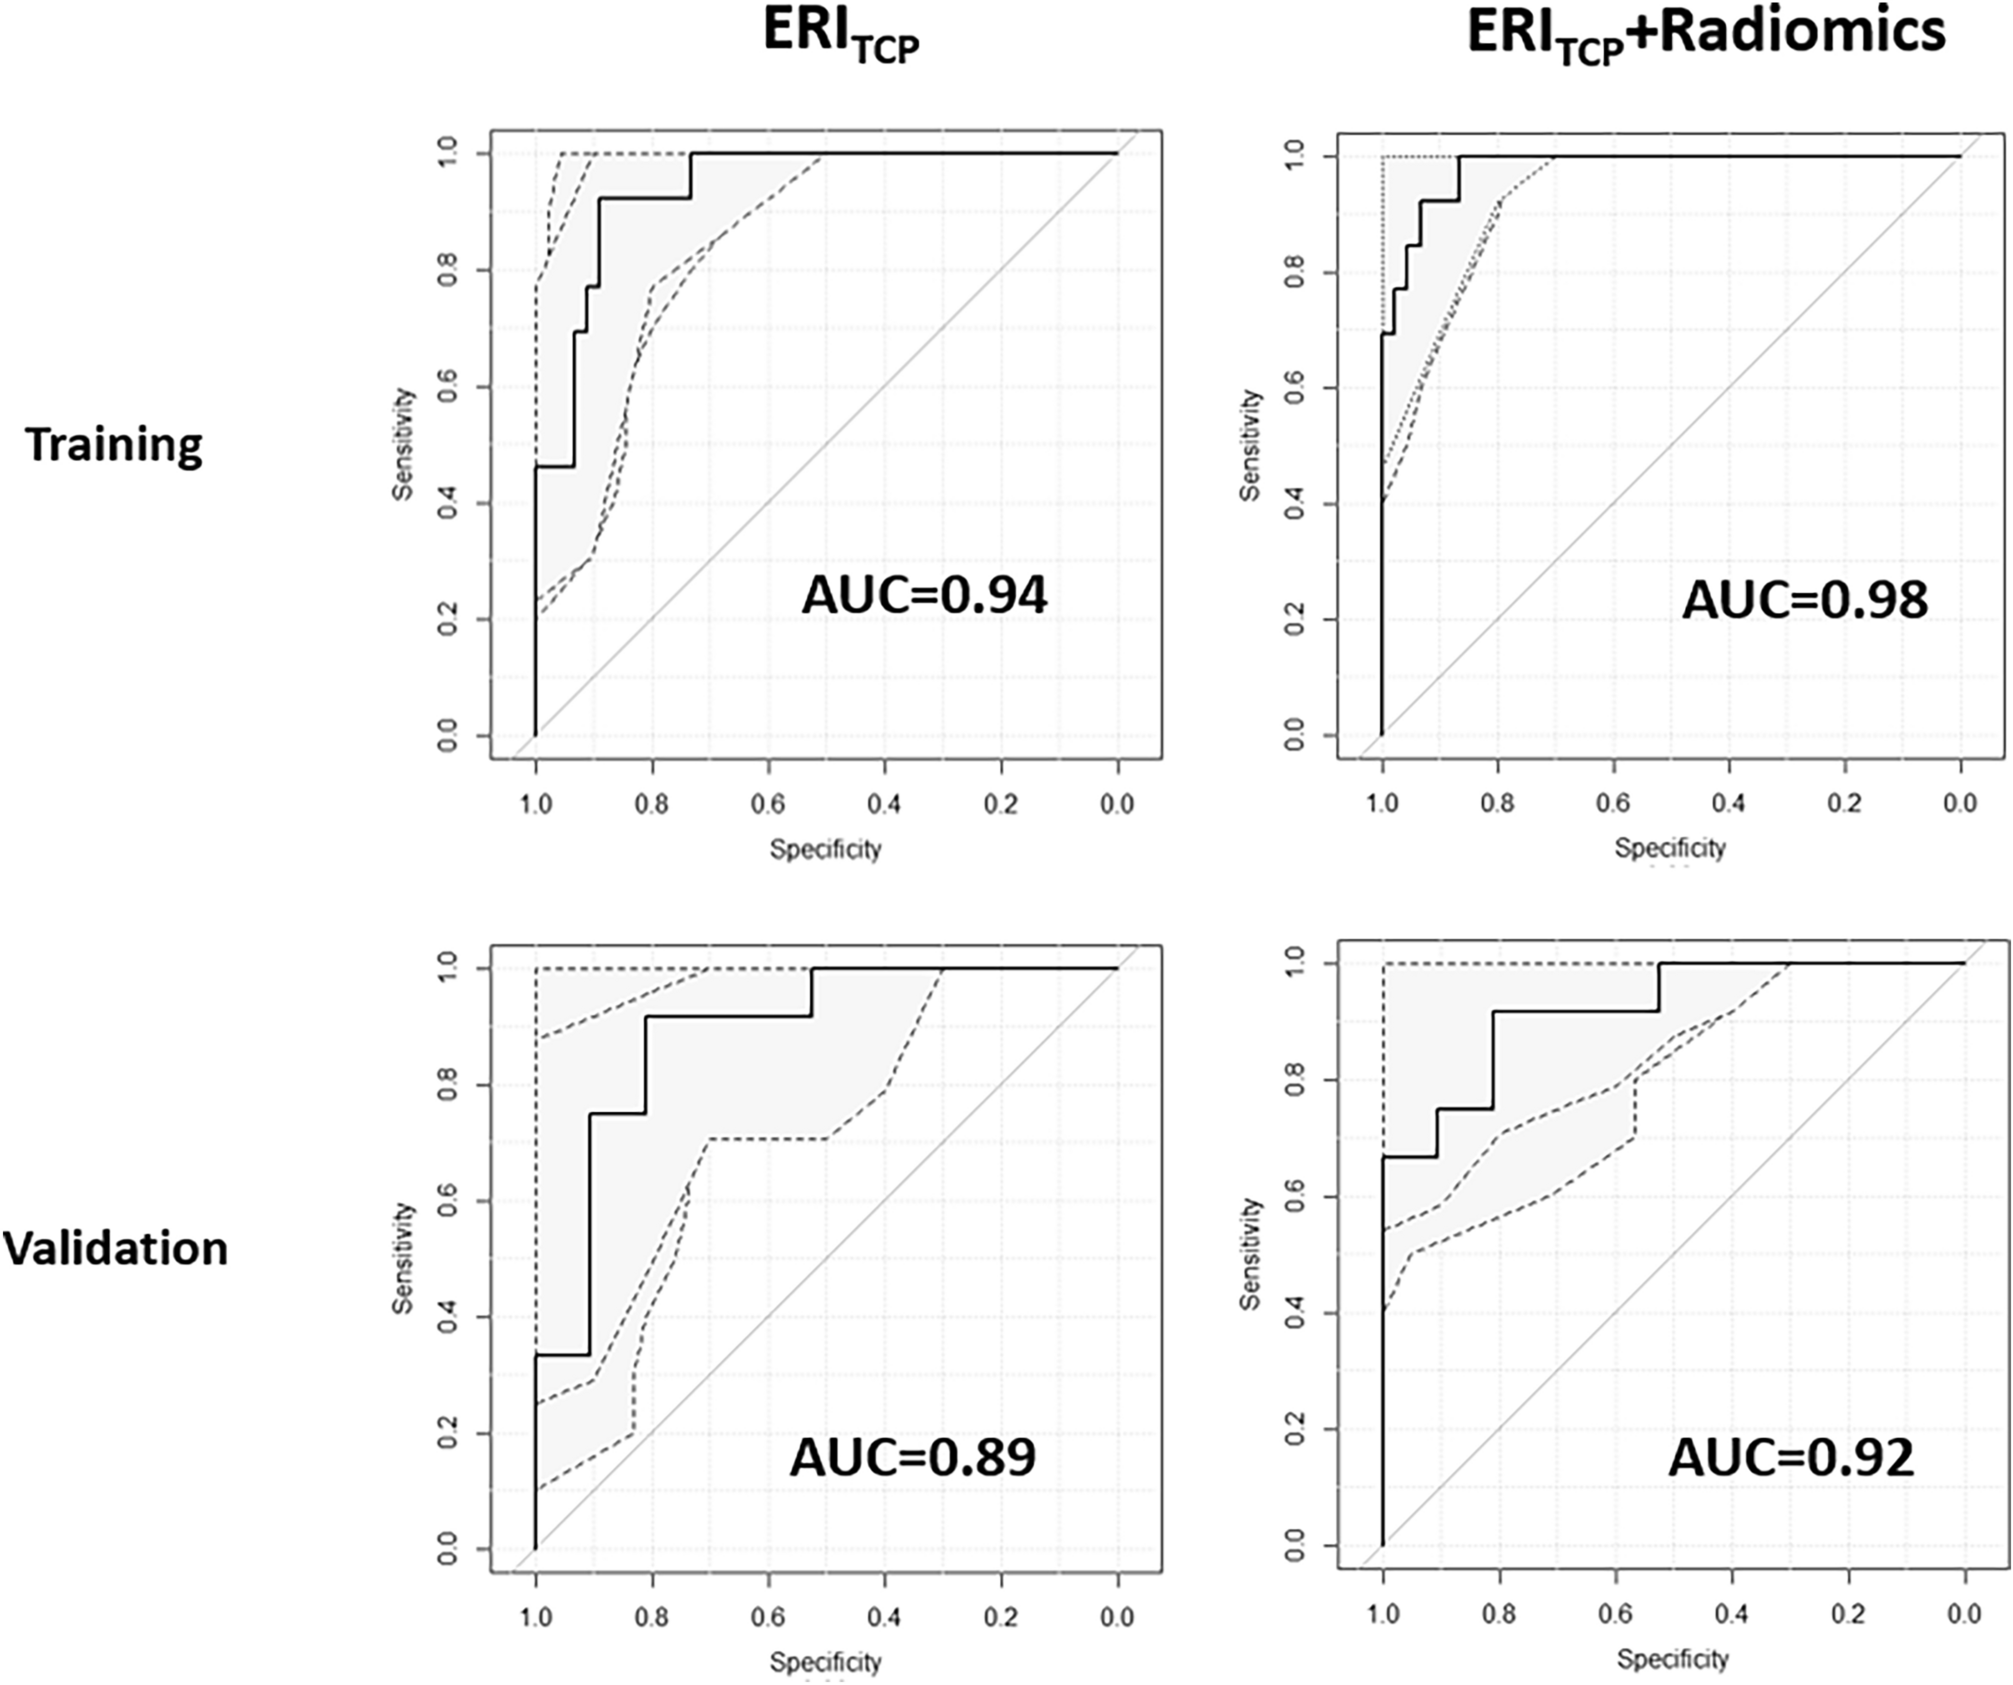 Radiomics-enhanced early regression index for predicting treatment response in rectal cancer: a multi-institutional 0.35 T MRI-guided radiotherapy study